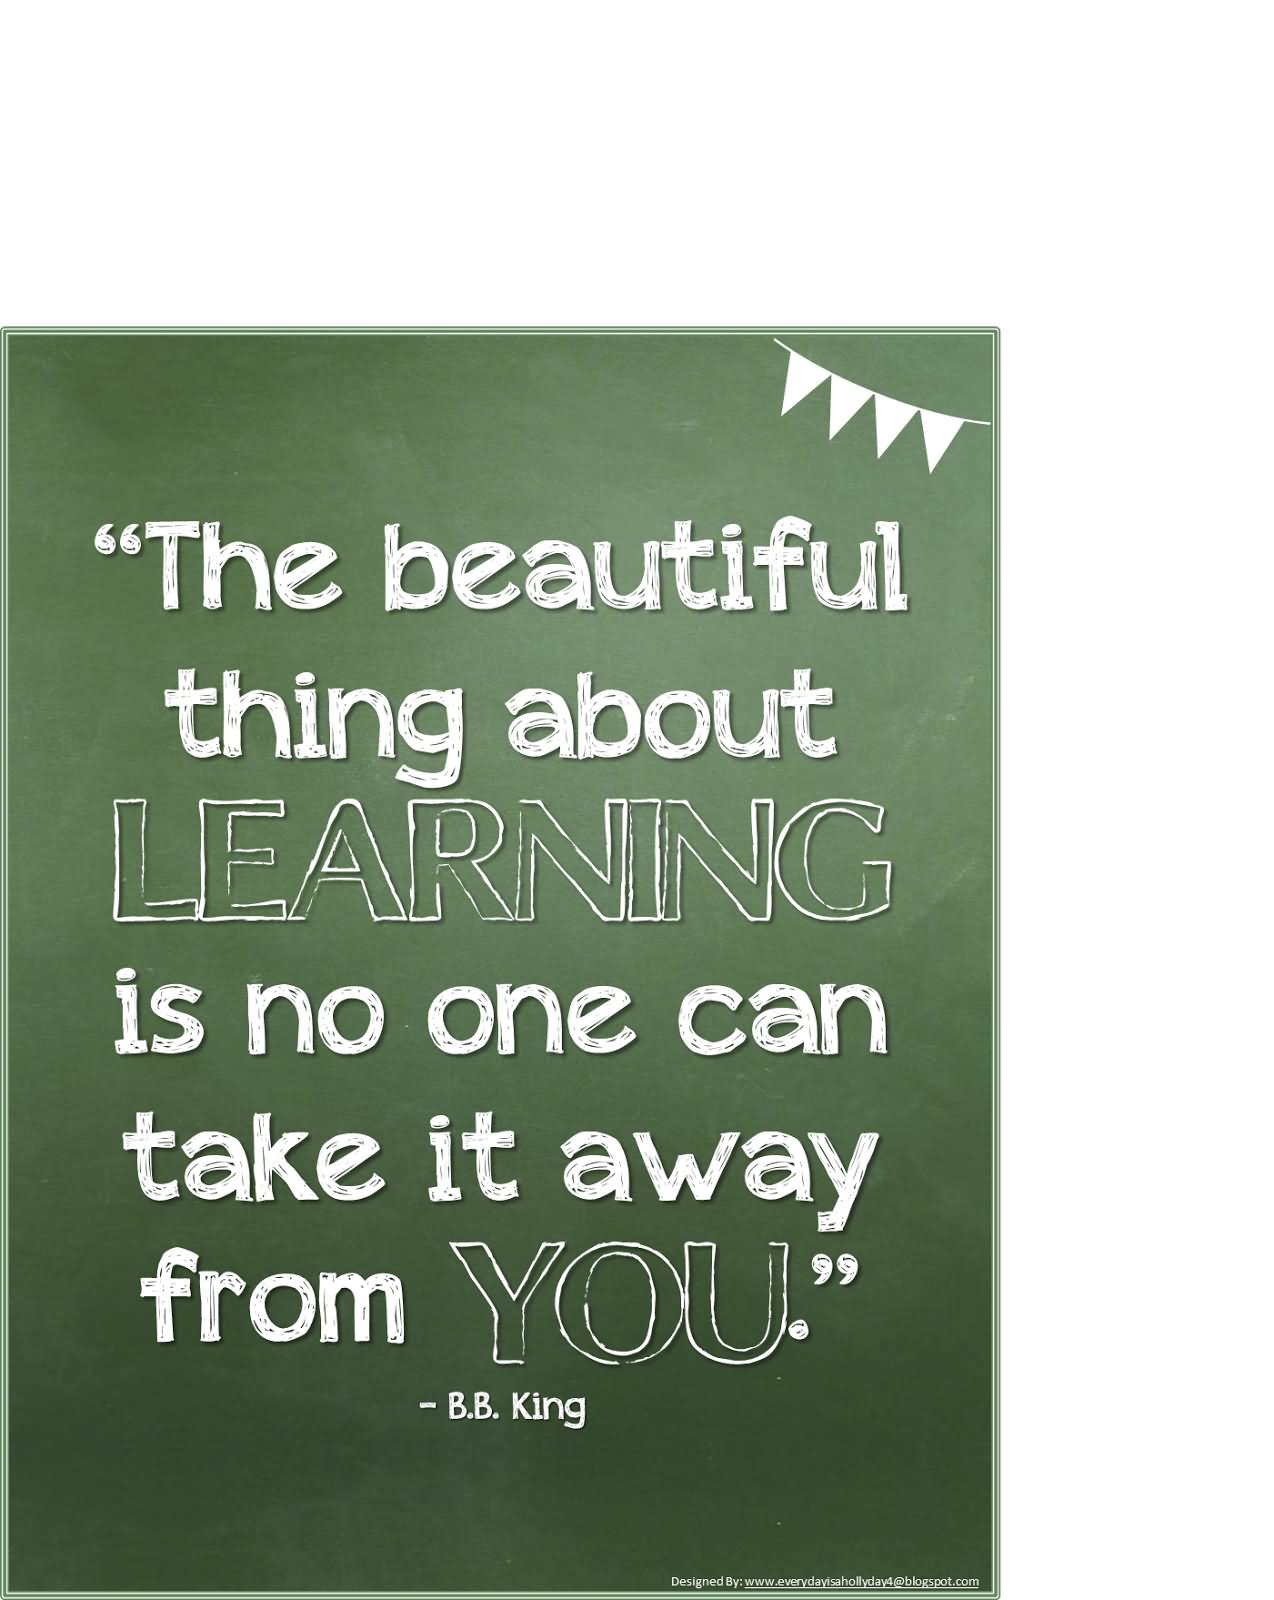 The beautiful thing about learning is nobody can take it away from you. - B. B. King 0